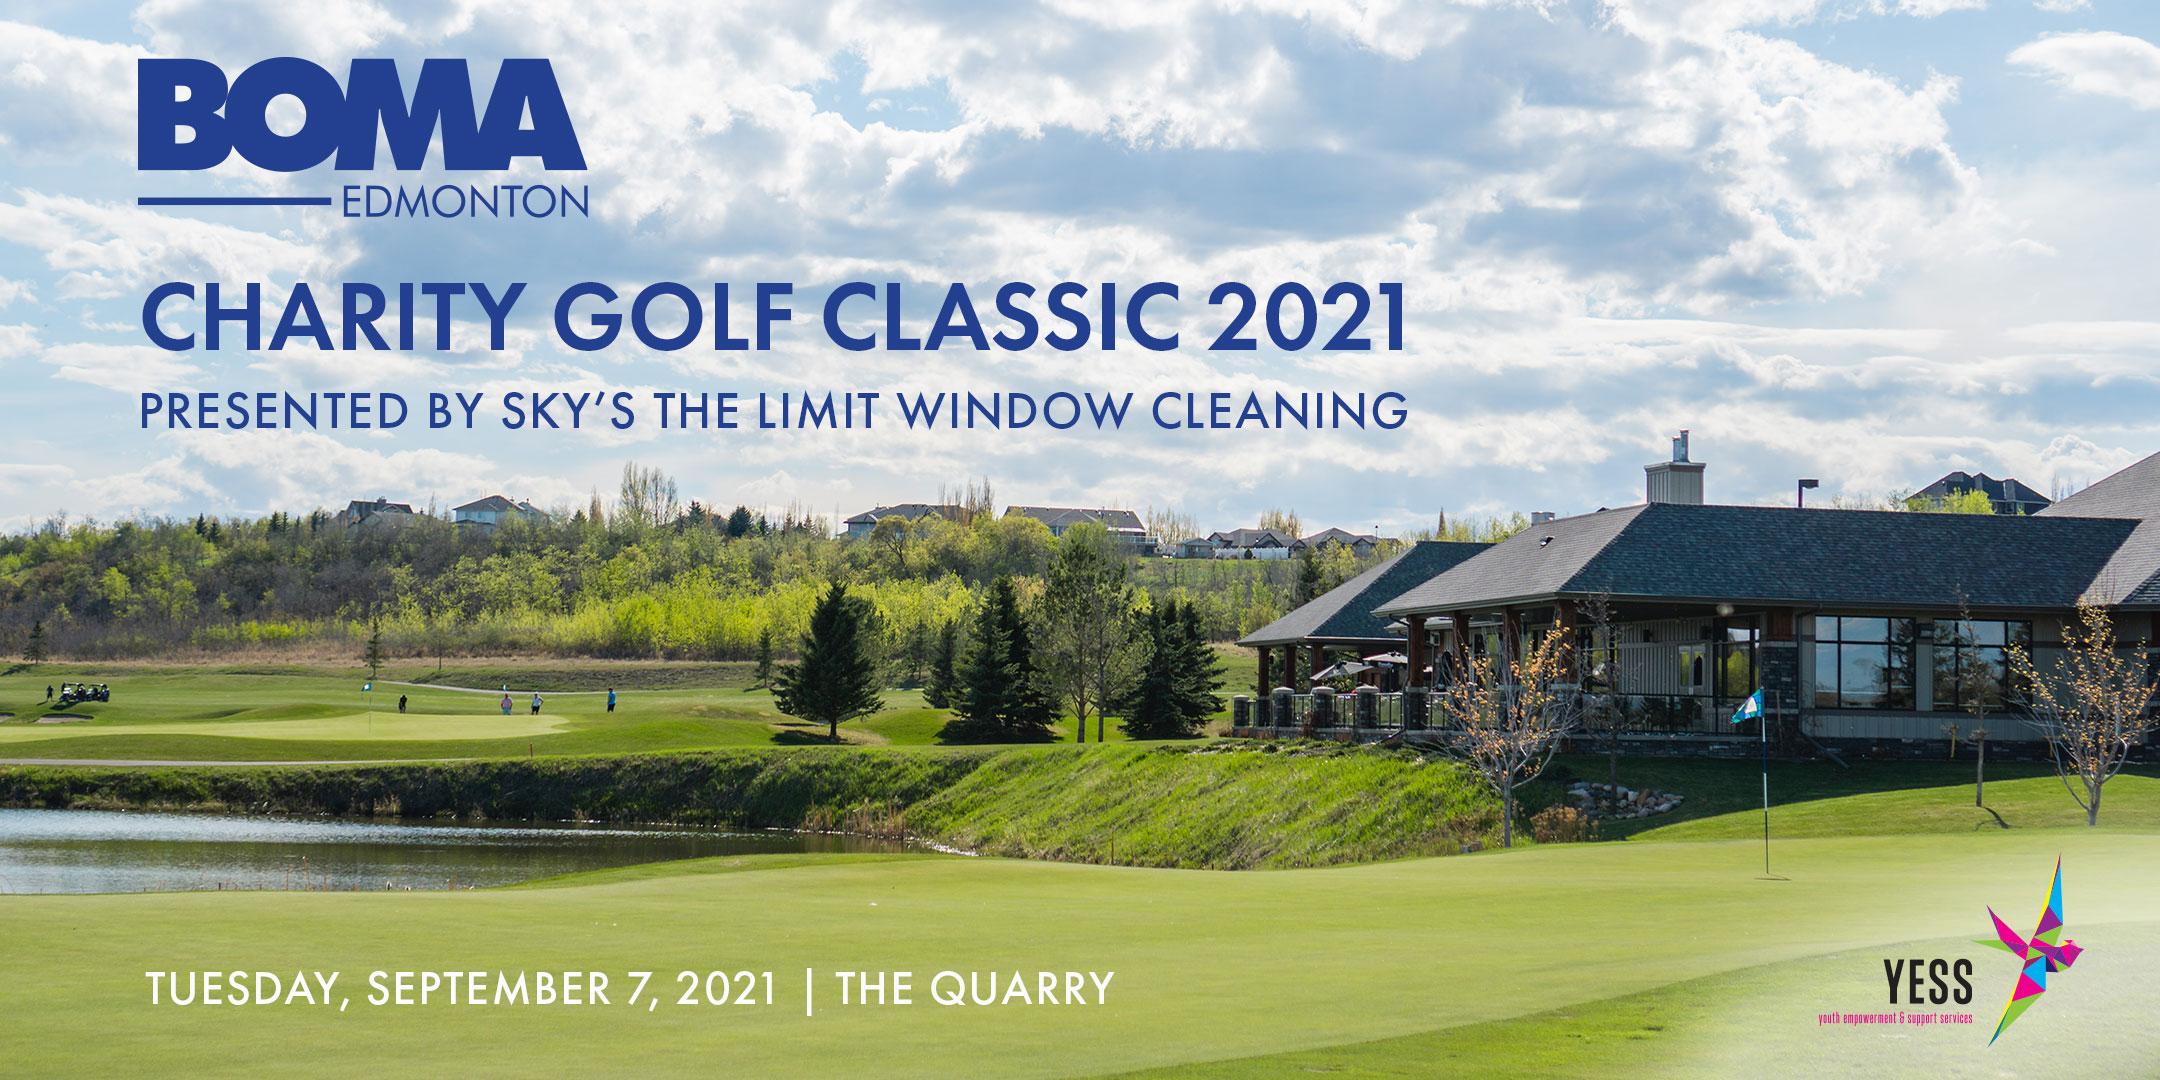 BOMA Edm Charity Golf Classic—Presented By Sky's The Limit Window Cleaning